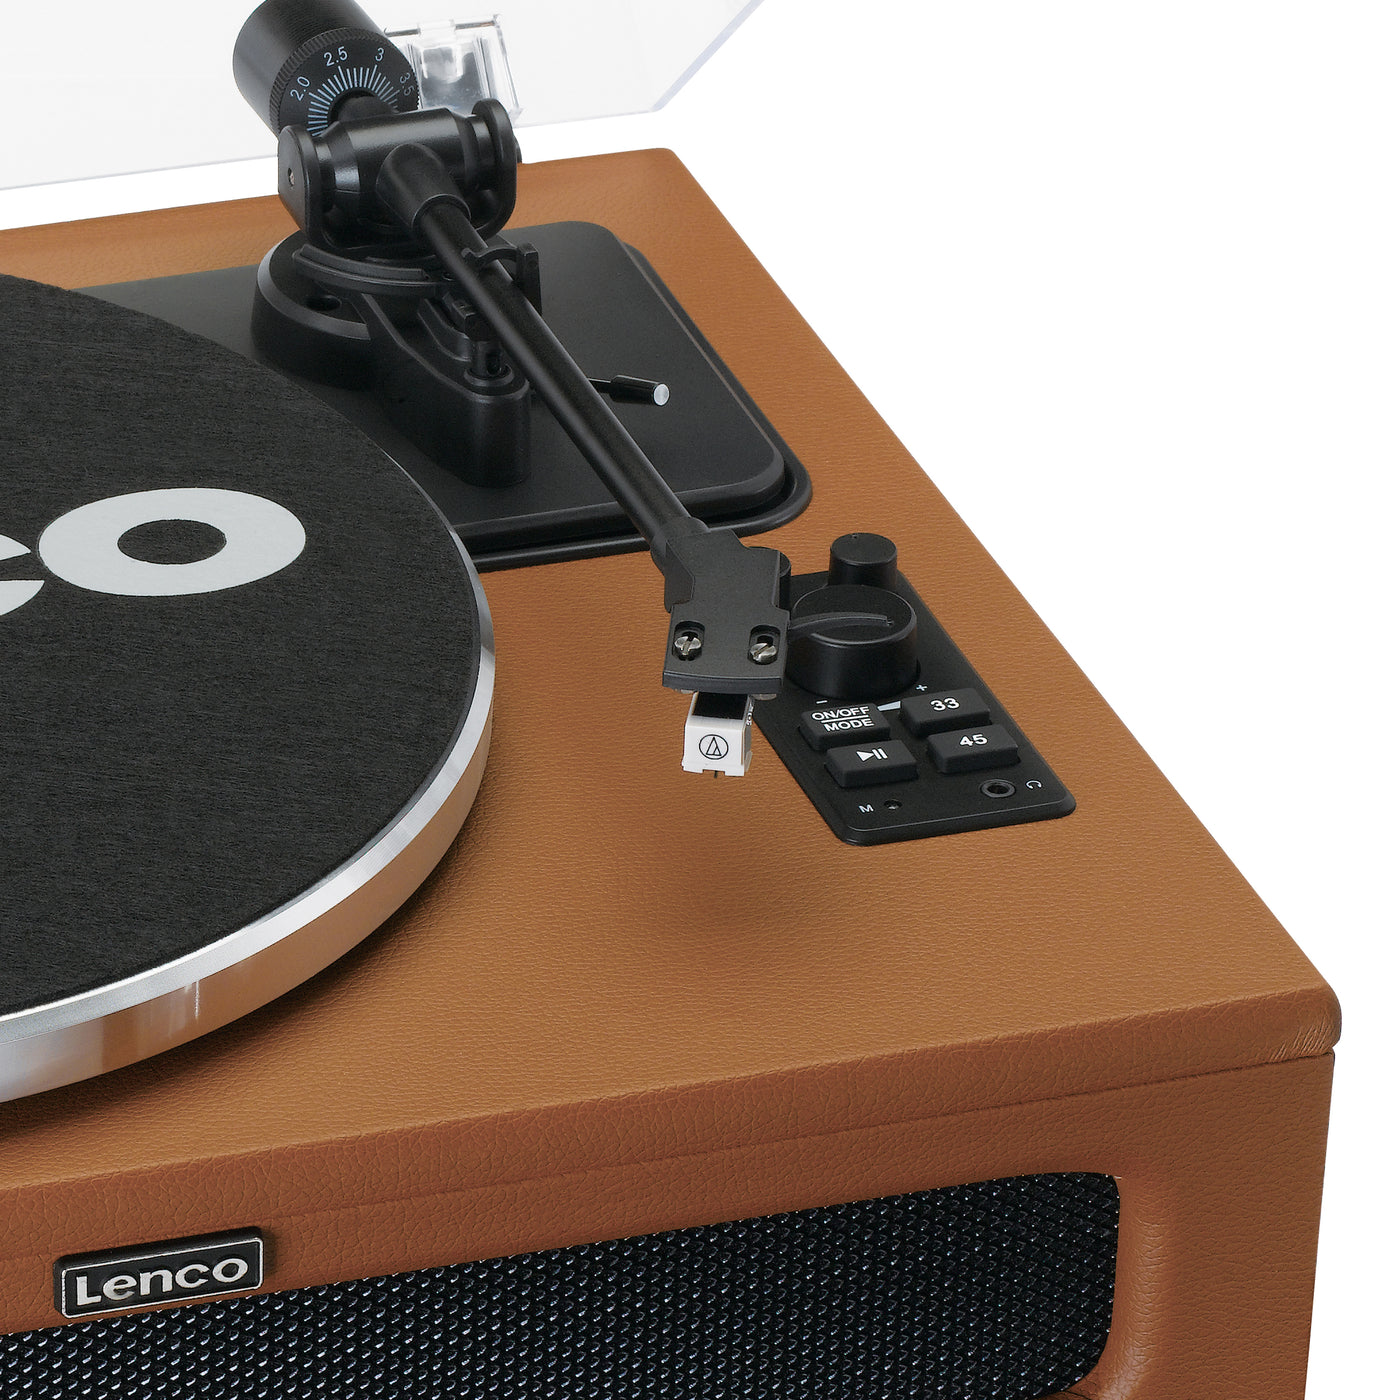 LENCO LS-430BN - Turntable with 4 built-in speakers - Brown